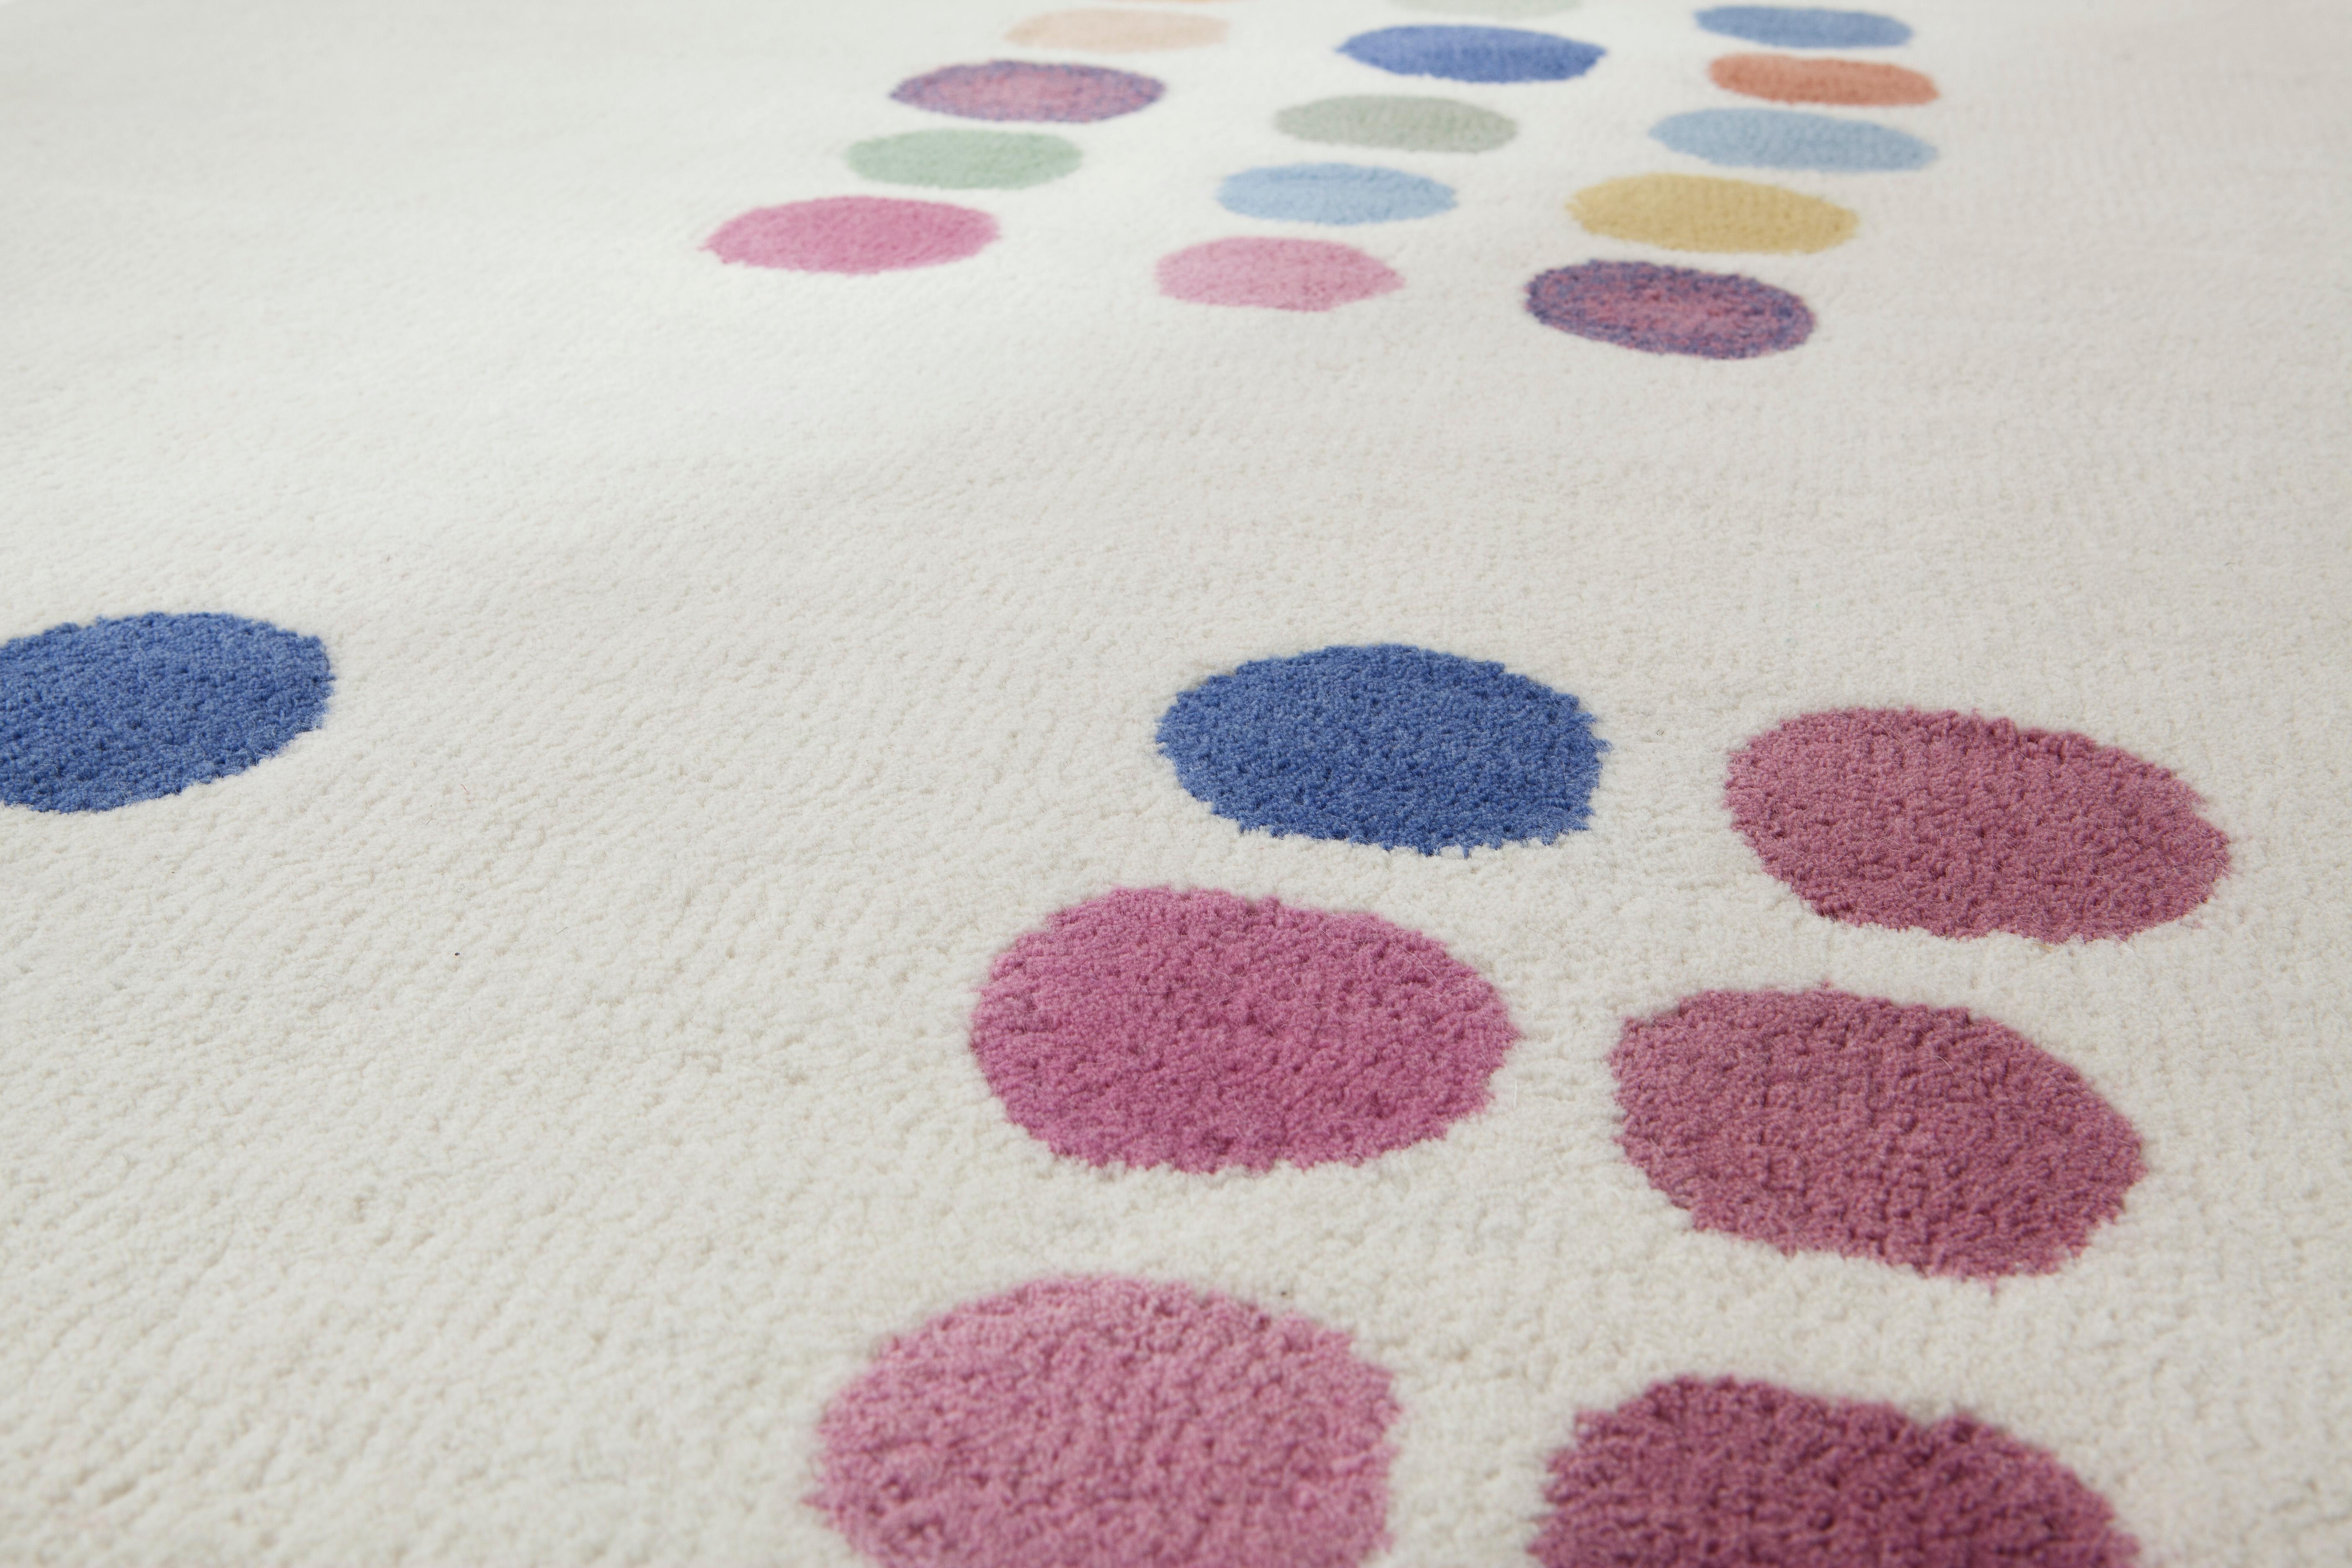 Points carpet, from Nodus 2012 collection, design by Aoi Huber Kono is a handtufted carpet in wool, pile height 100mm
Made in India. Measures: 100 x 350cm.